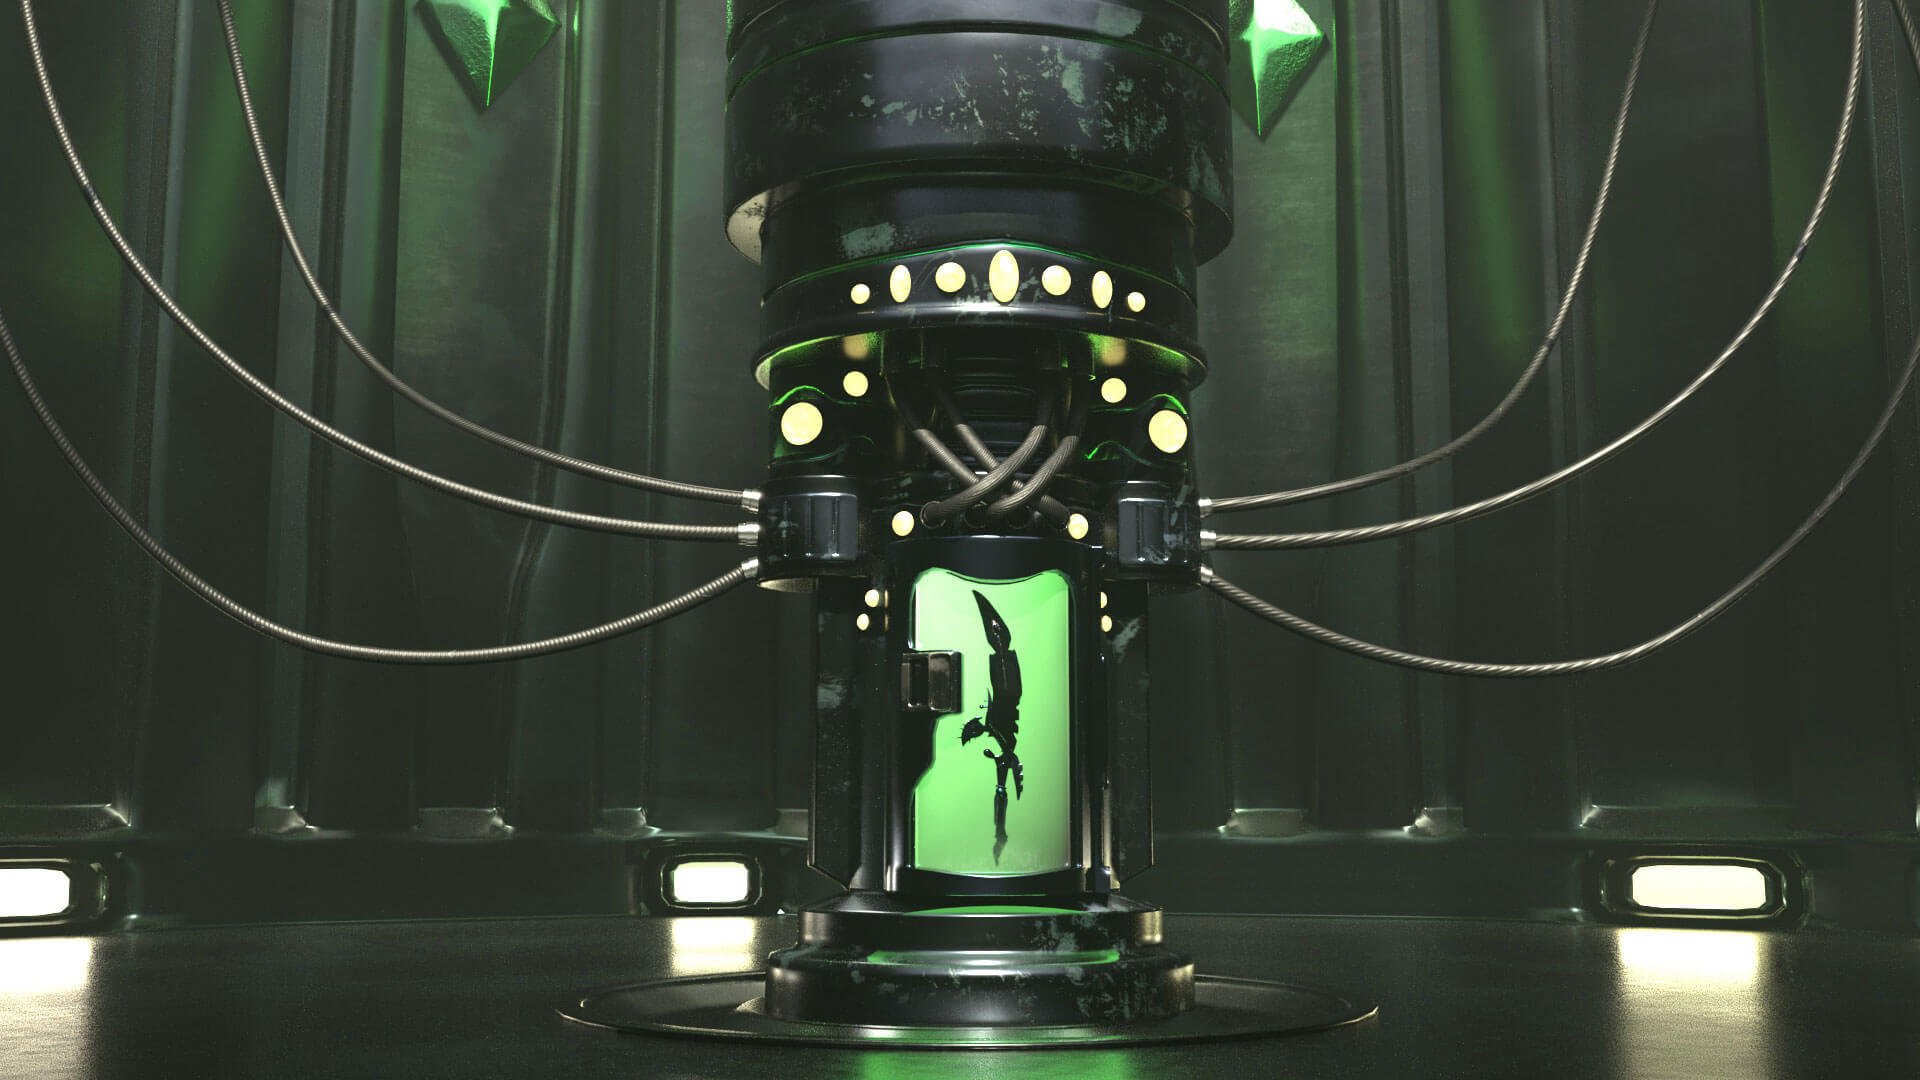 A green glowing capsule hooked up to a machine containing a sword.